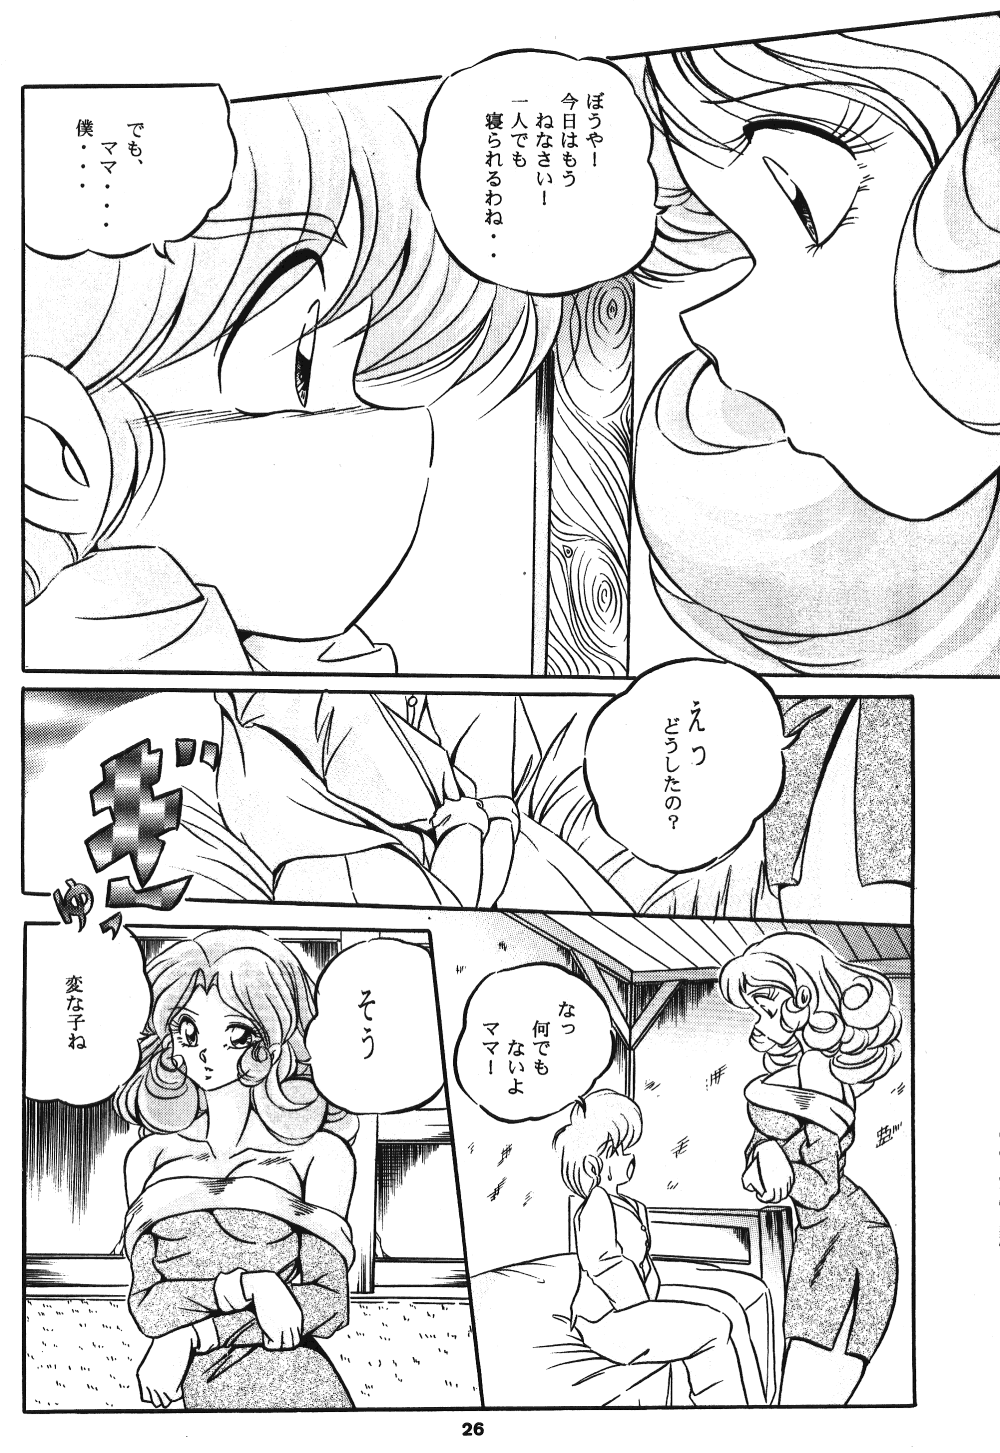 [C-Company] C-COMPANY SPECIAL STAGE 15 (Darkstalkers, Ranma 1/2) page 27 full